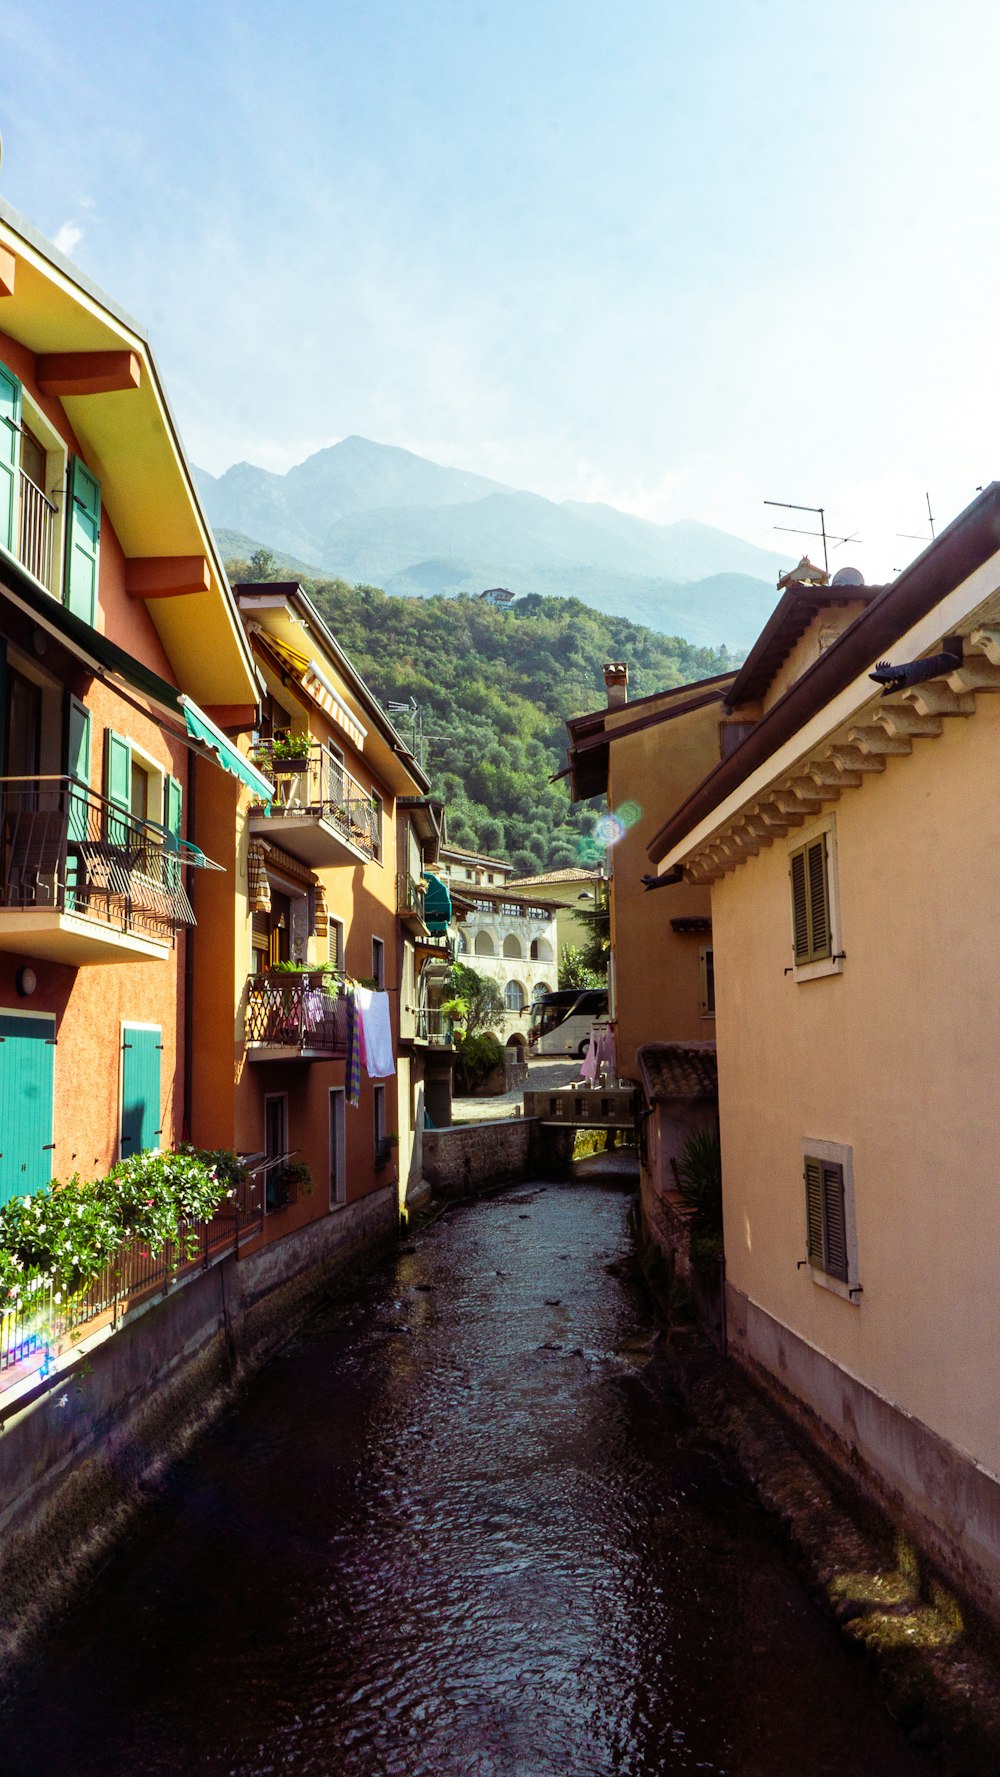 a narrow street with buildings on both sides and a mountain in the background